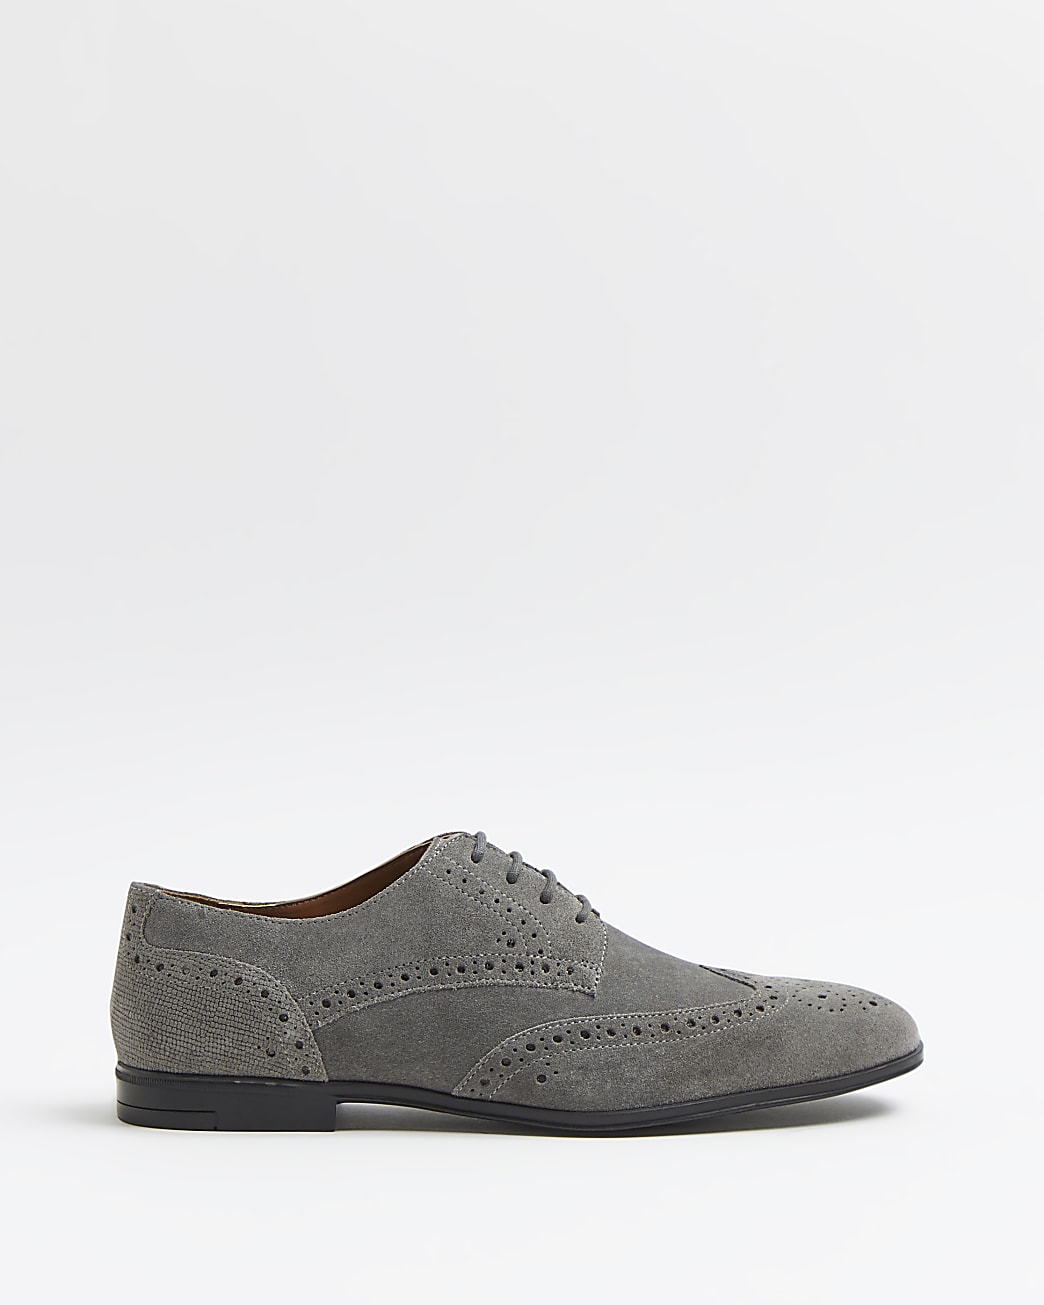 Grey suede lace up brogue derby shoes